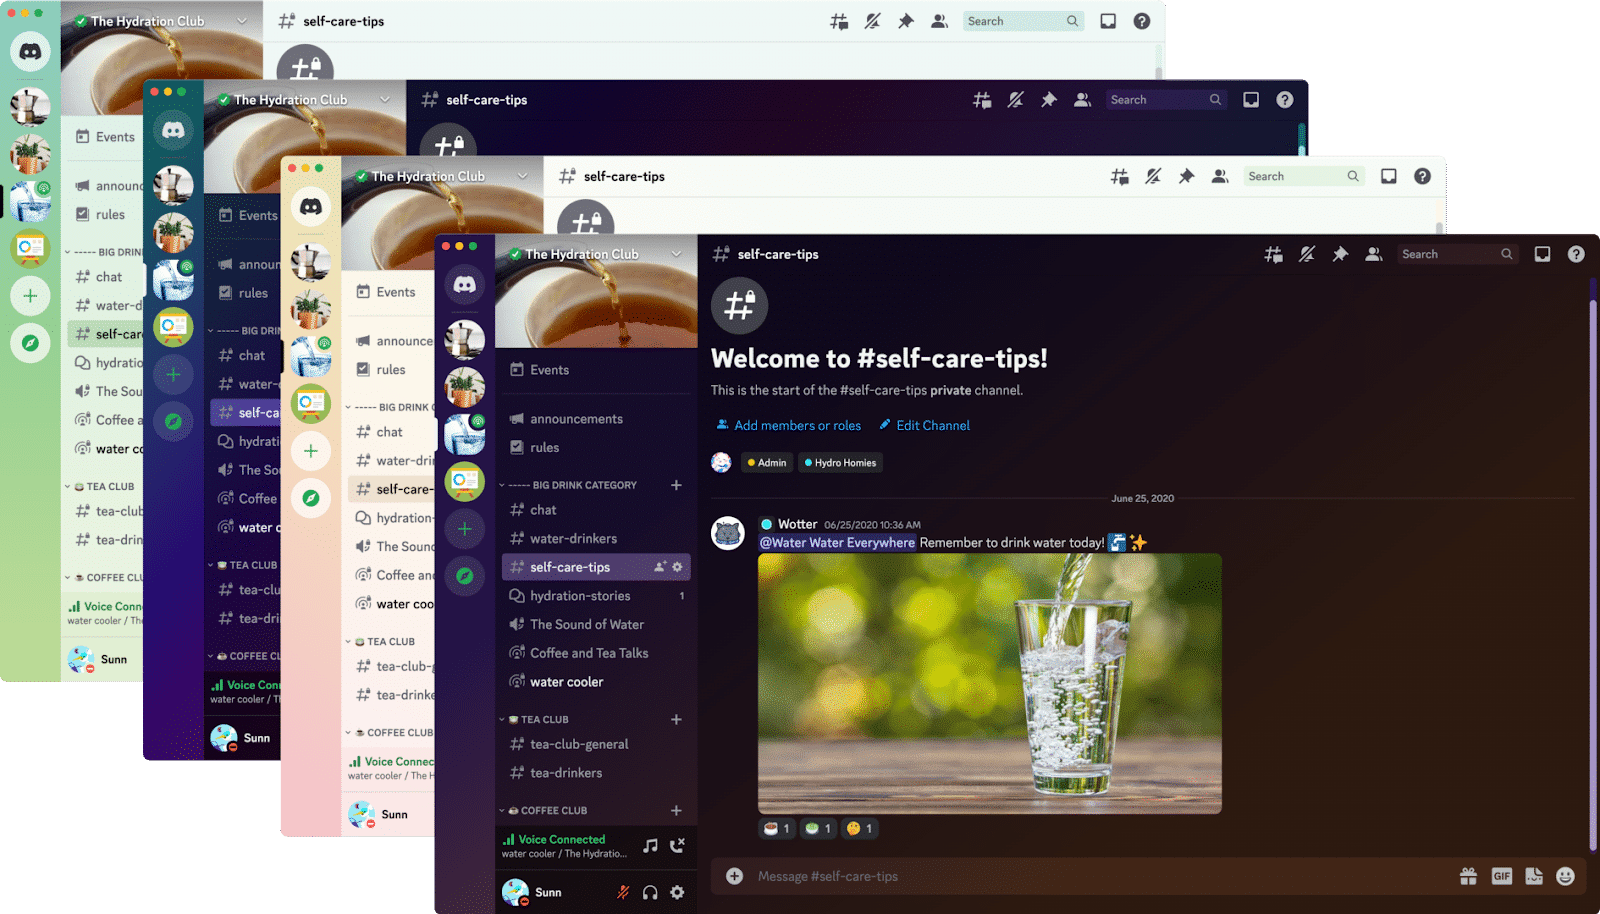 Discord Themes Now Lets You Change The Look Of The App, But Only For Nitro Subscribers 